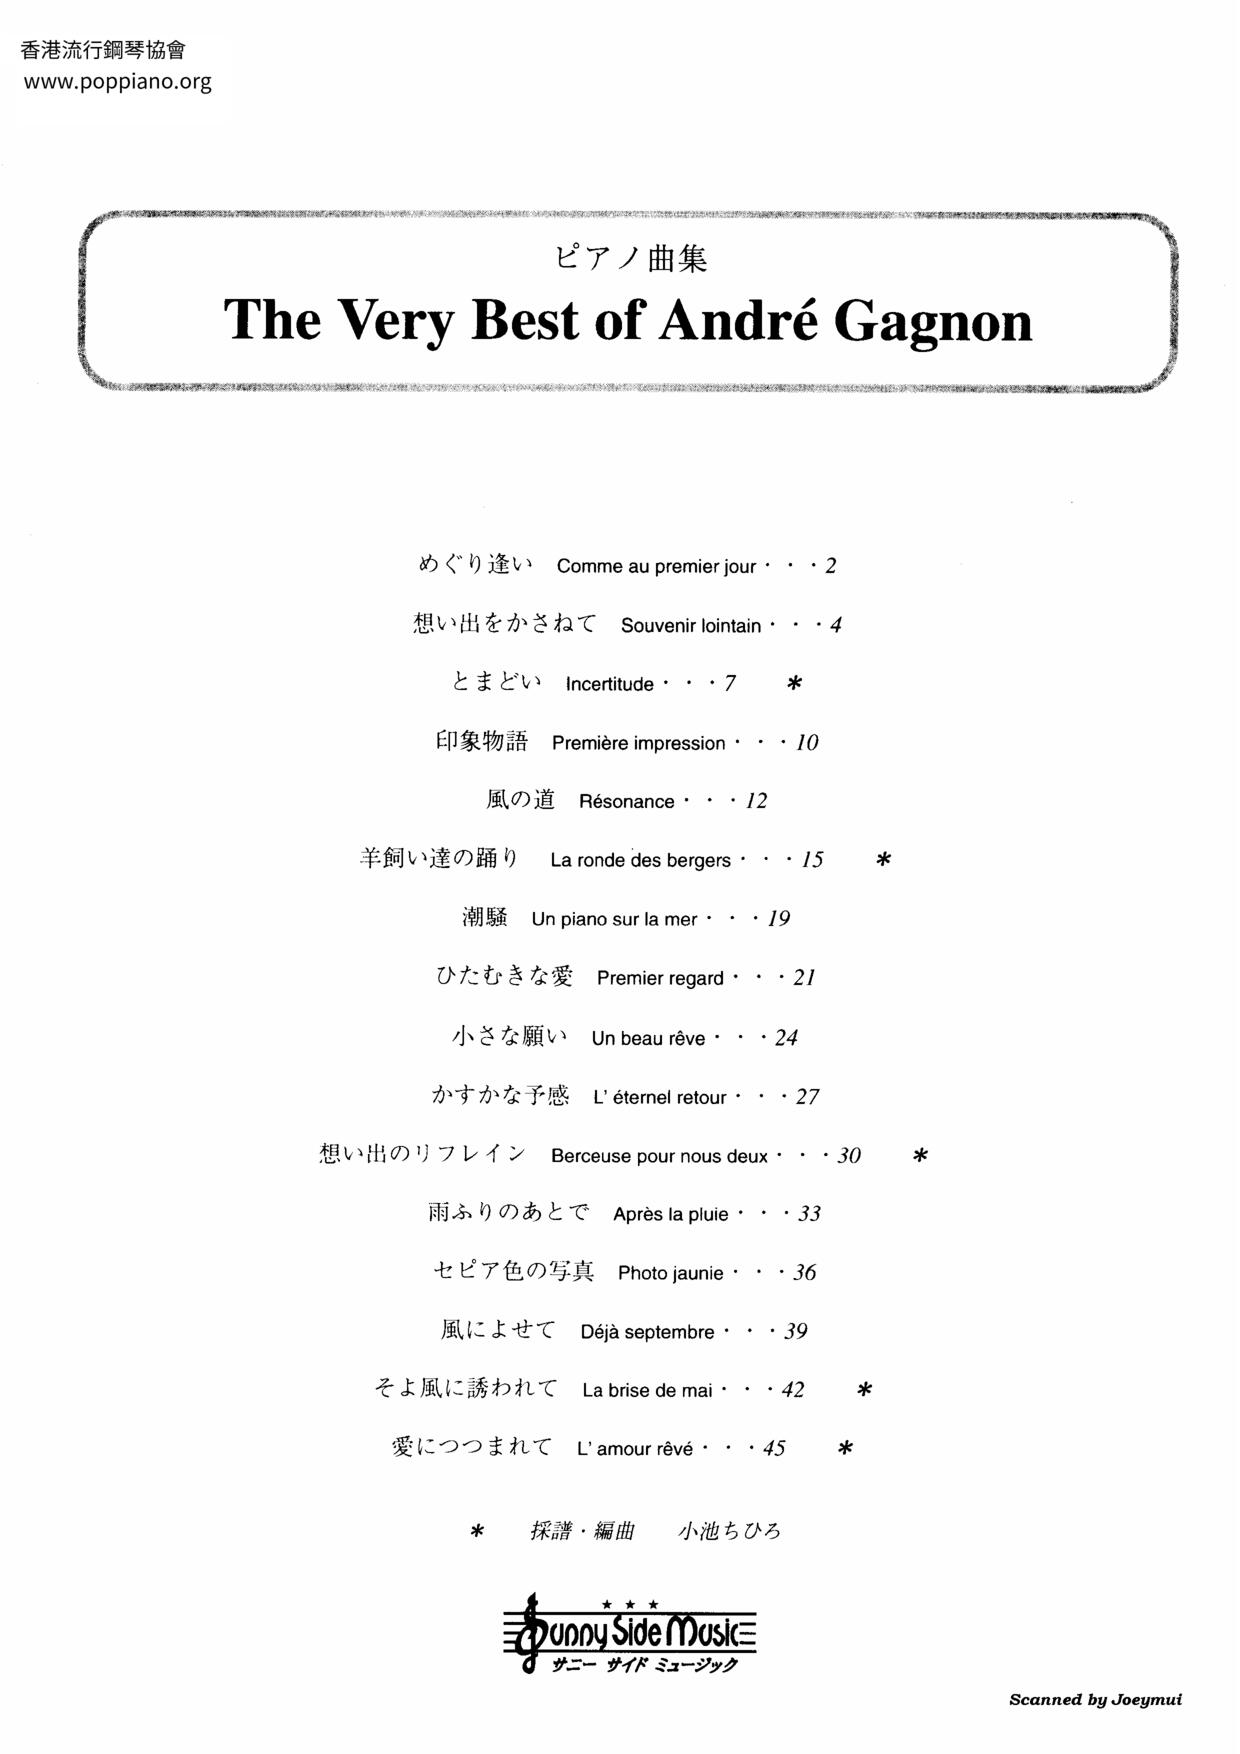 The Very Best of Andre Gagnon 46 pages琴谱